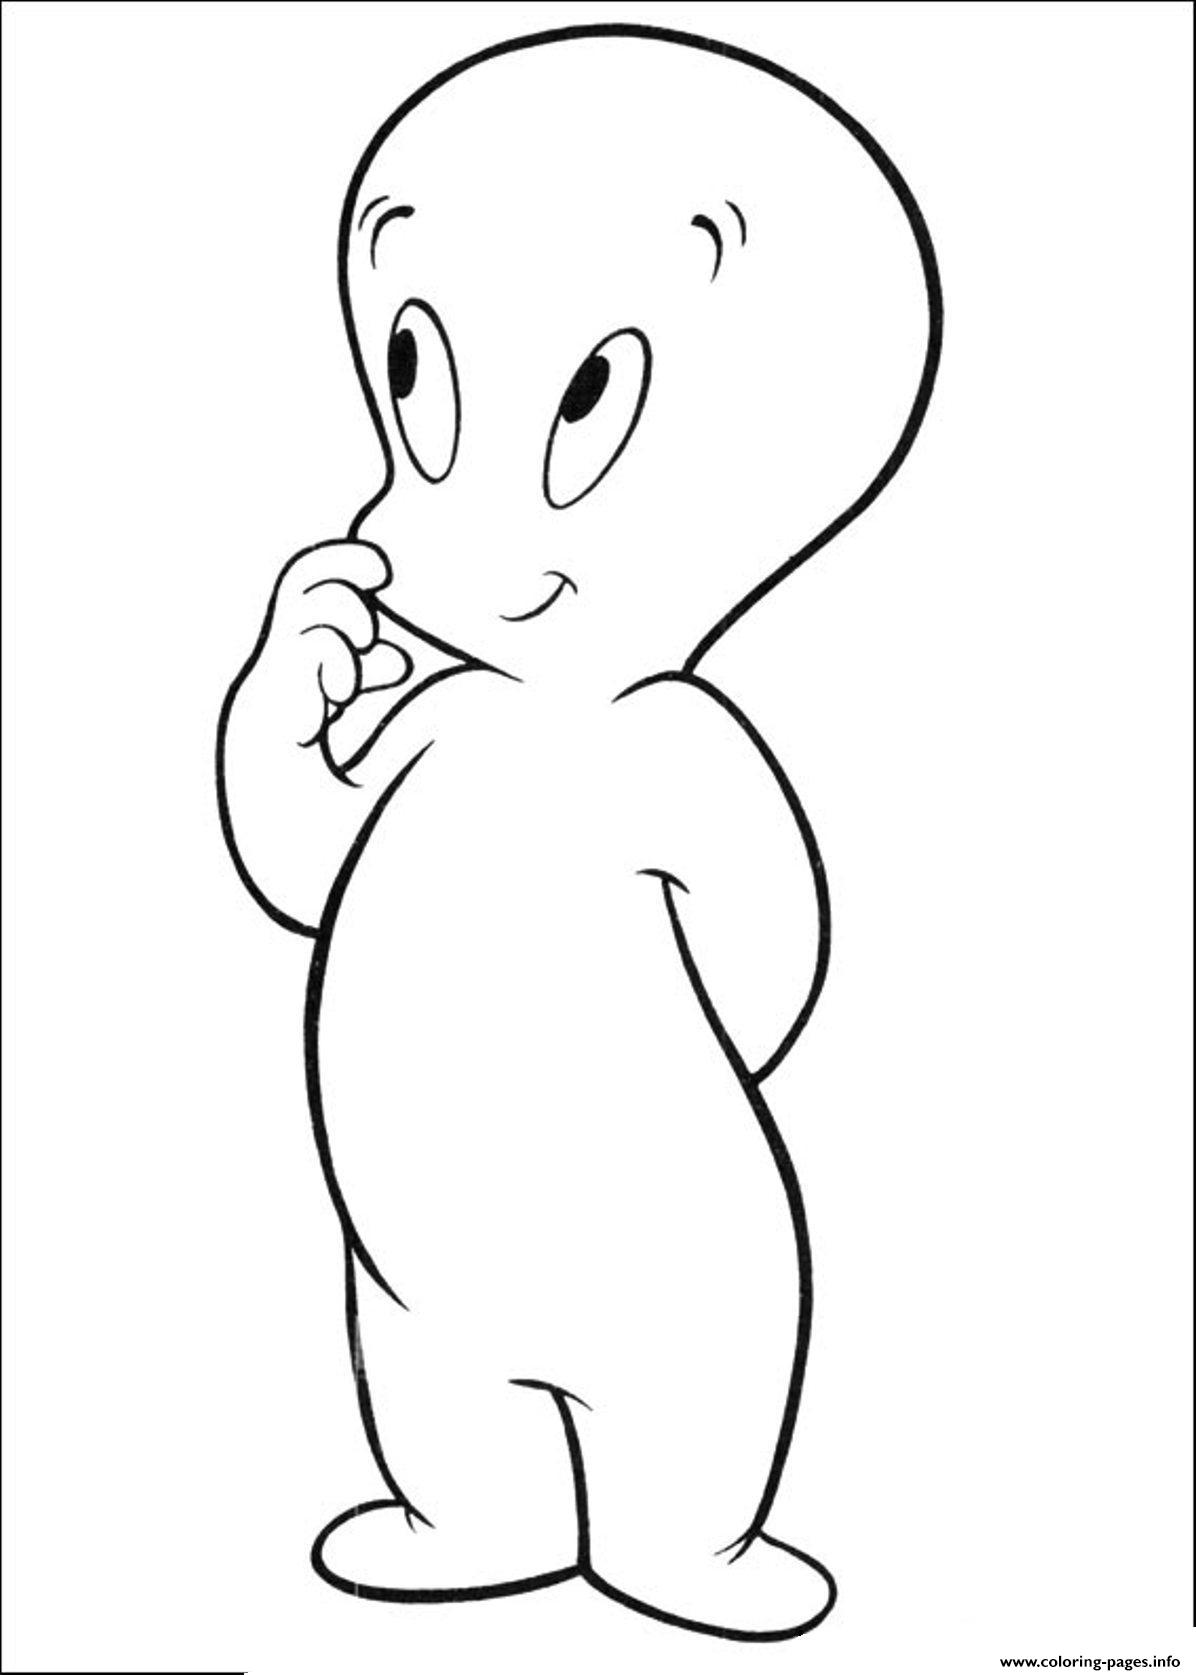 Download Curious Casper Ghost S For Kidsa29b Coloring Pages Printable